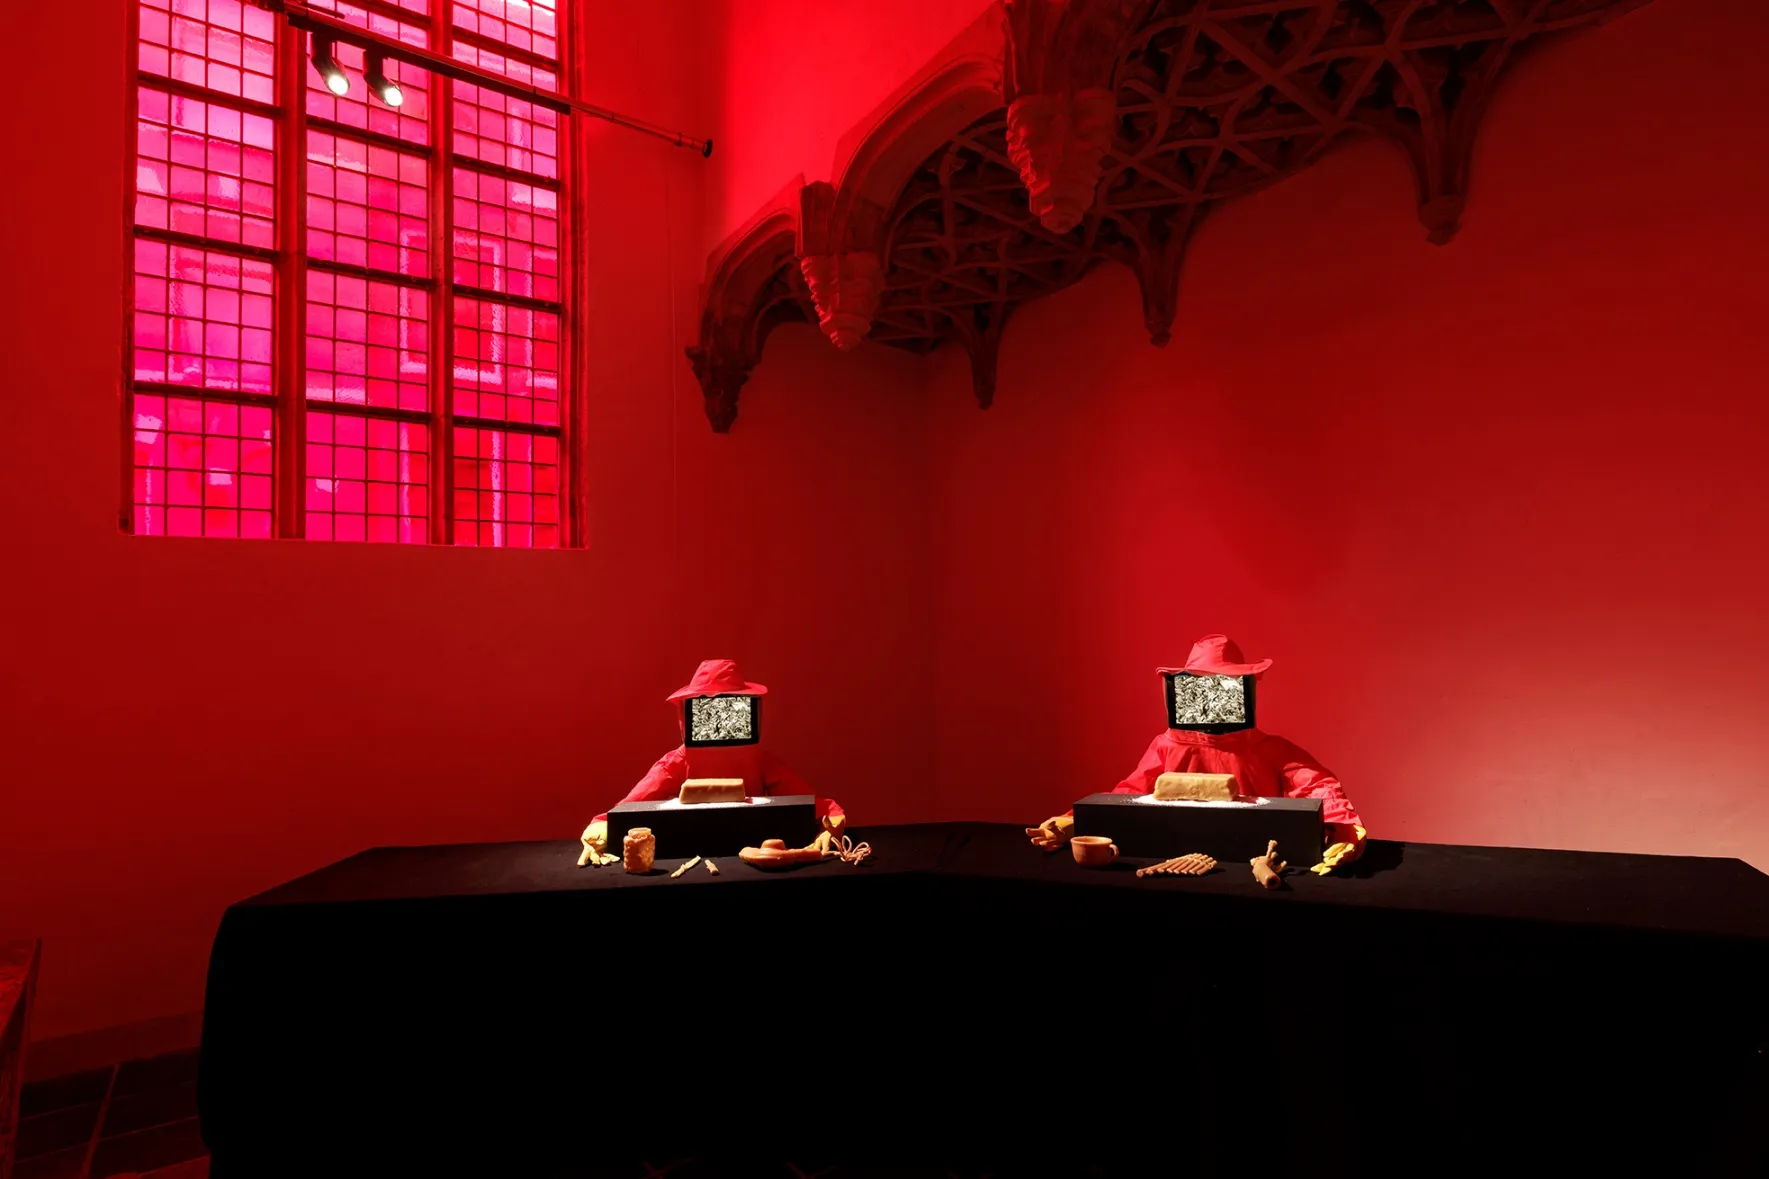 Two red beekeepers outfits with TV screen-covered faces seated at a black table with beeswax objects, illuminated by red light.